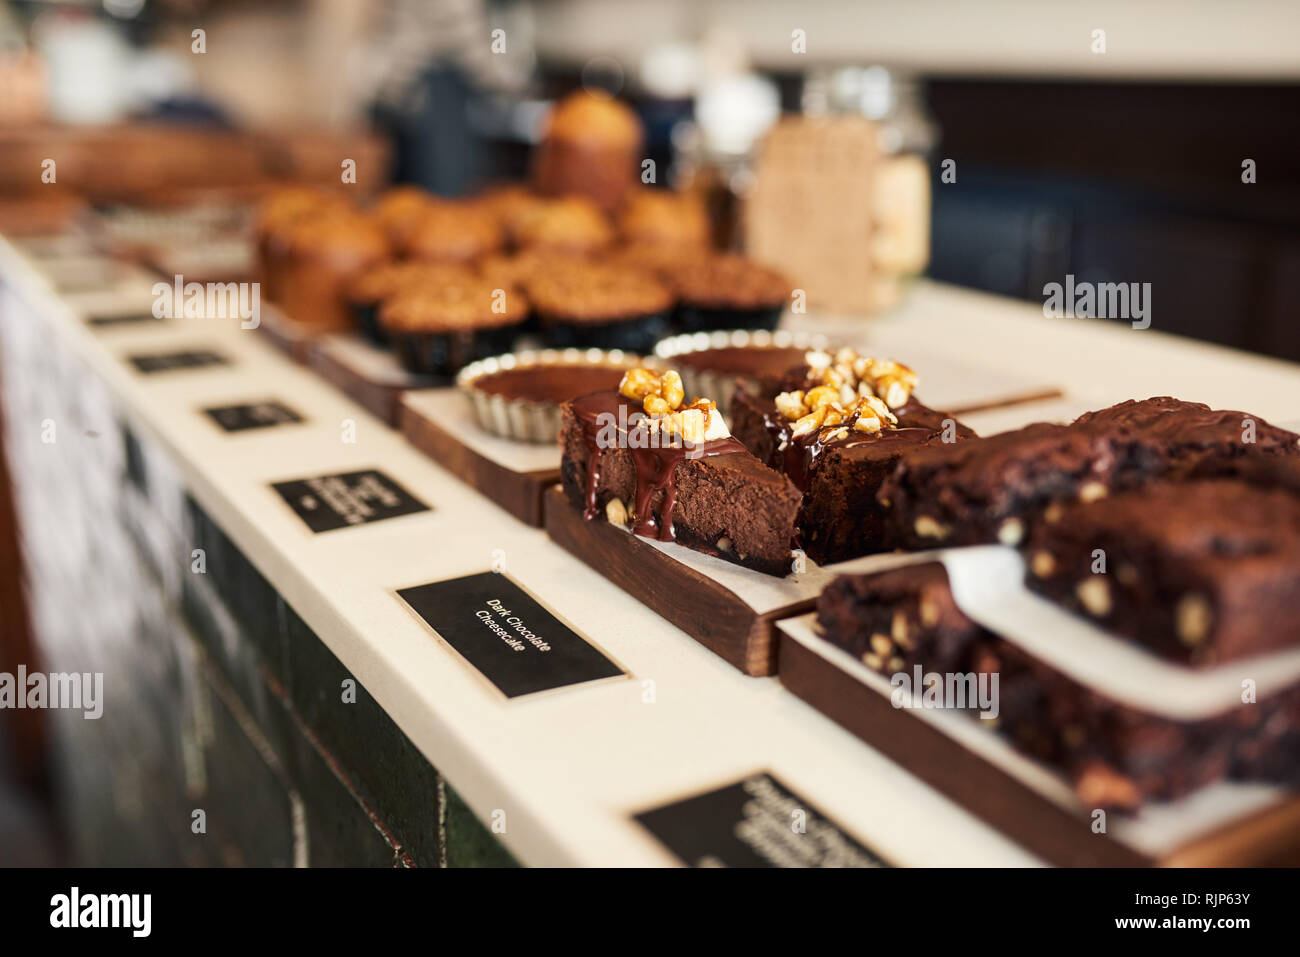 Assortment of delicious desserts in a bakery's glass display case Stock Photo